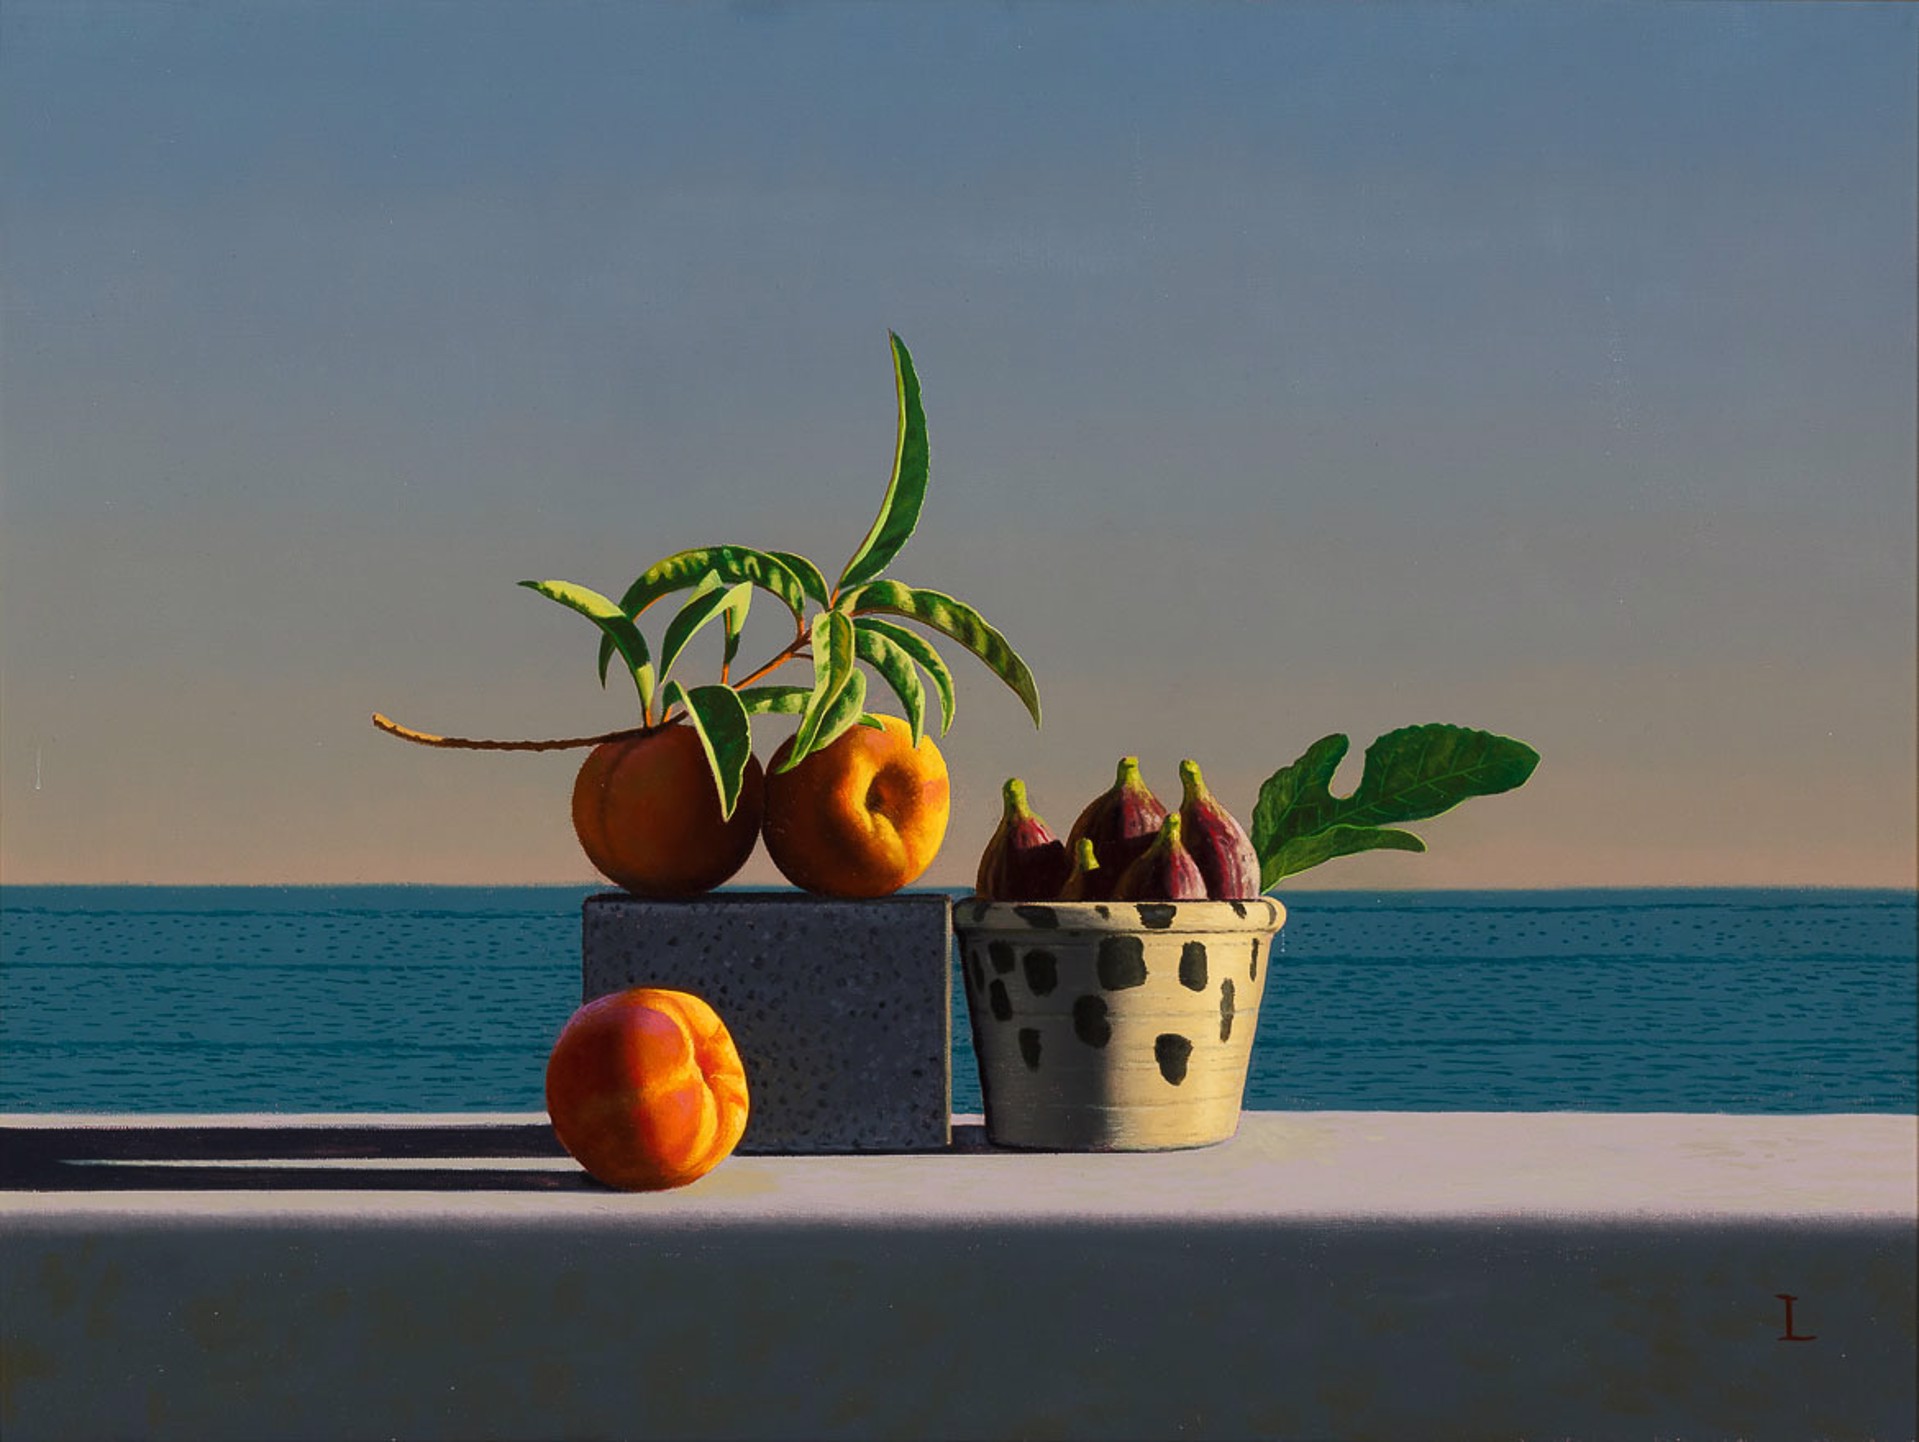 Offering: Peaches and Figs by David Ligare